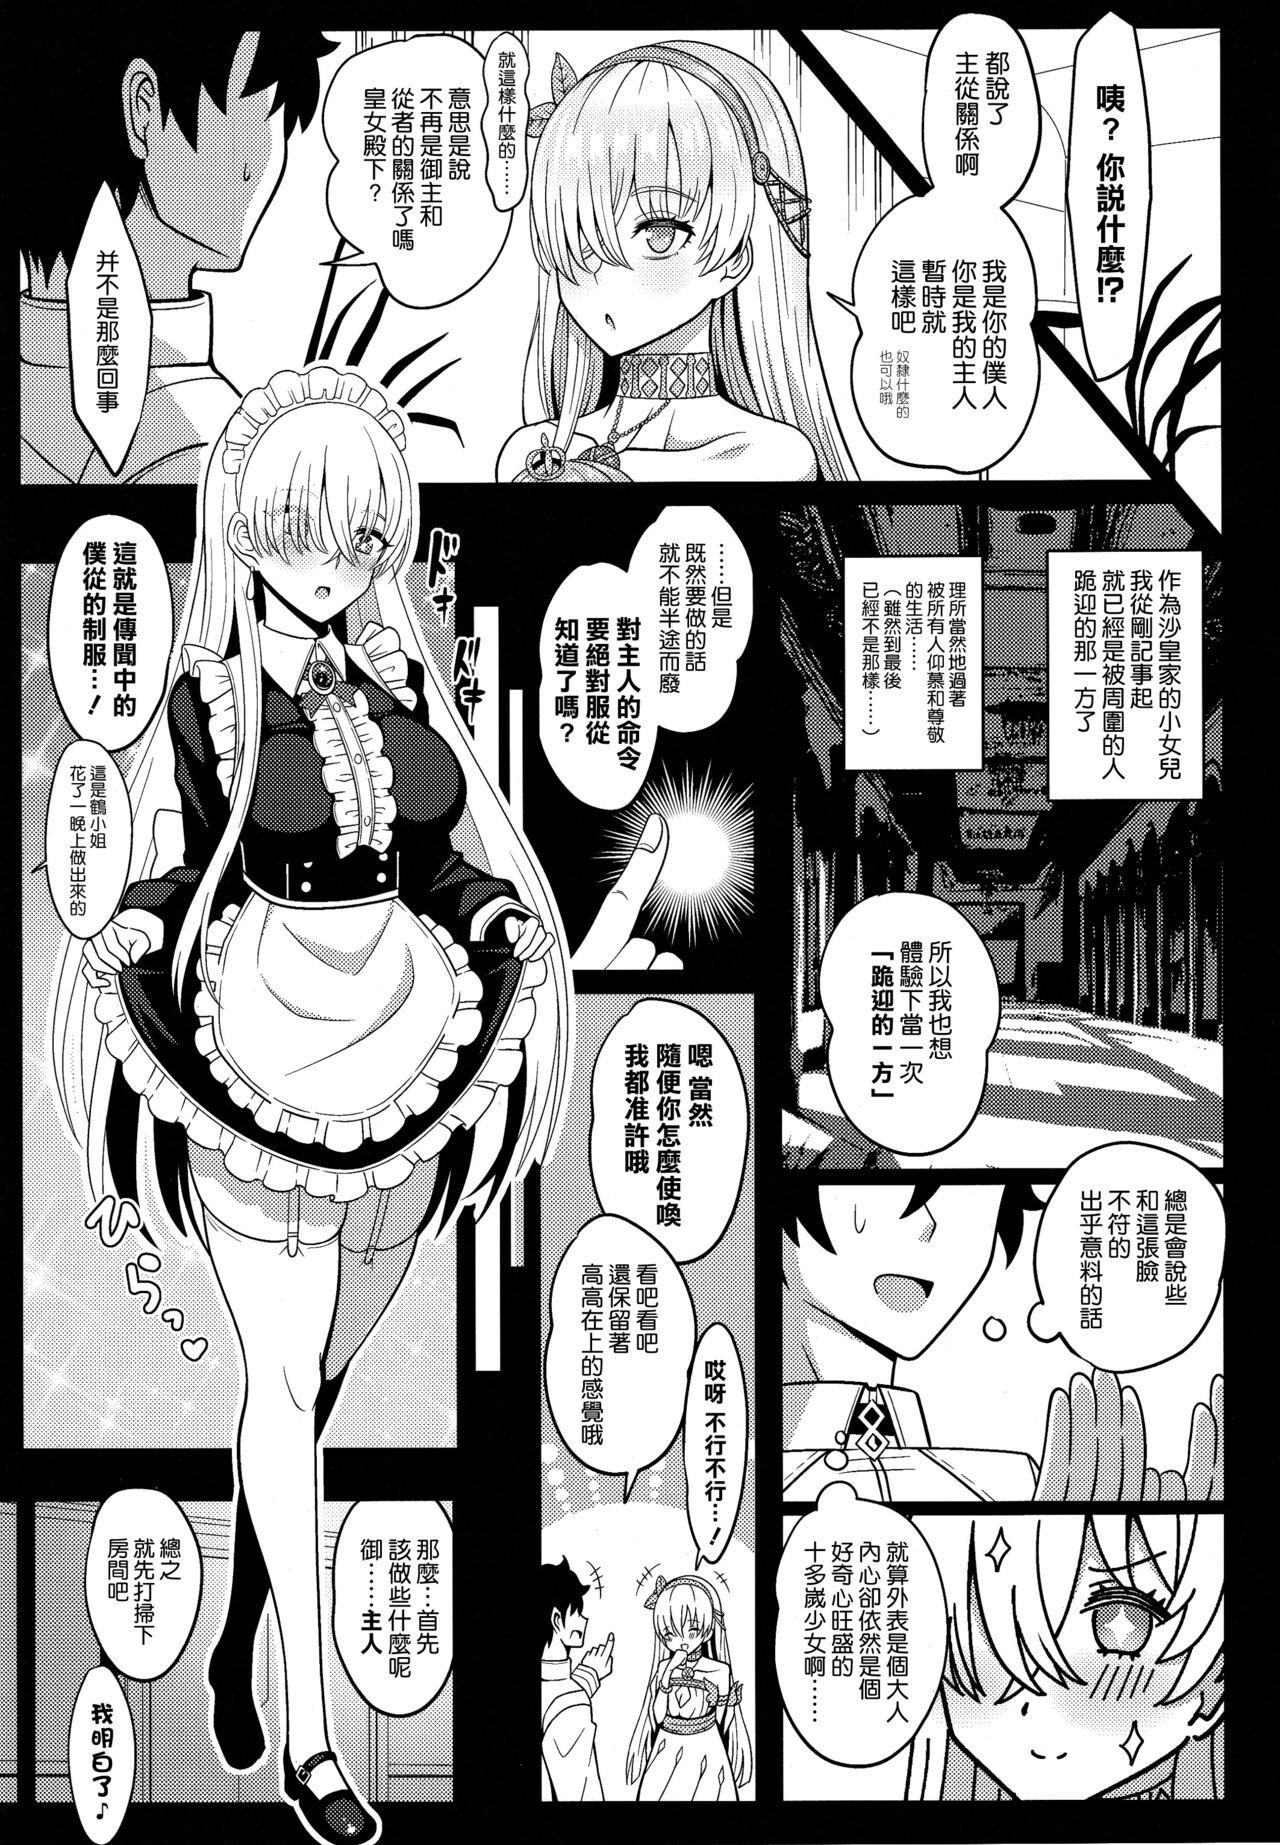 Webcams 皇女様と卵 - Fate grand order Milfporn - Page 6